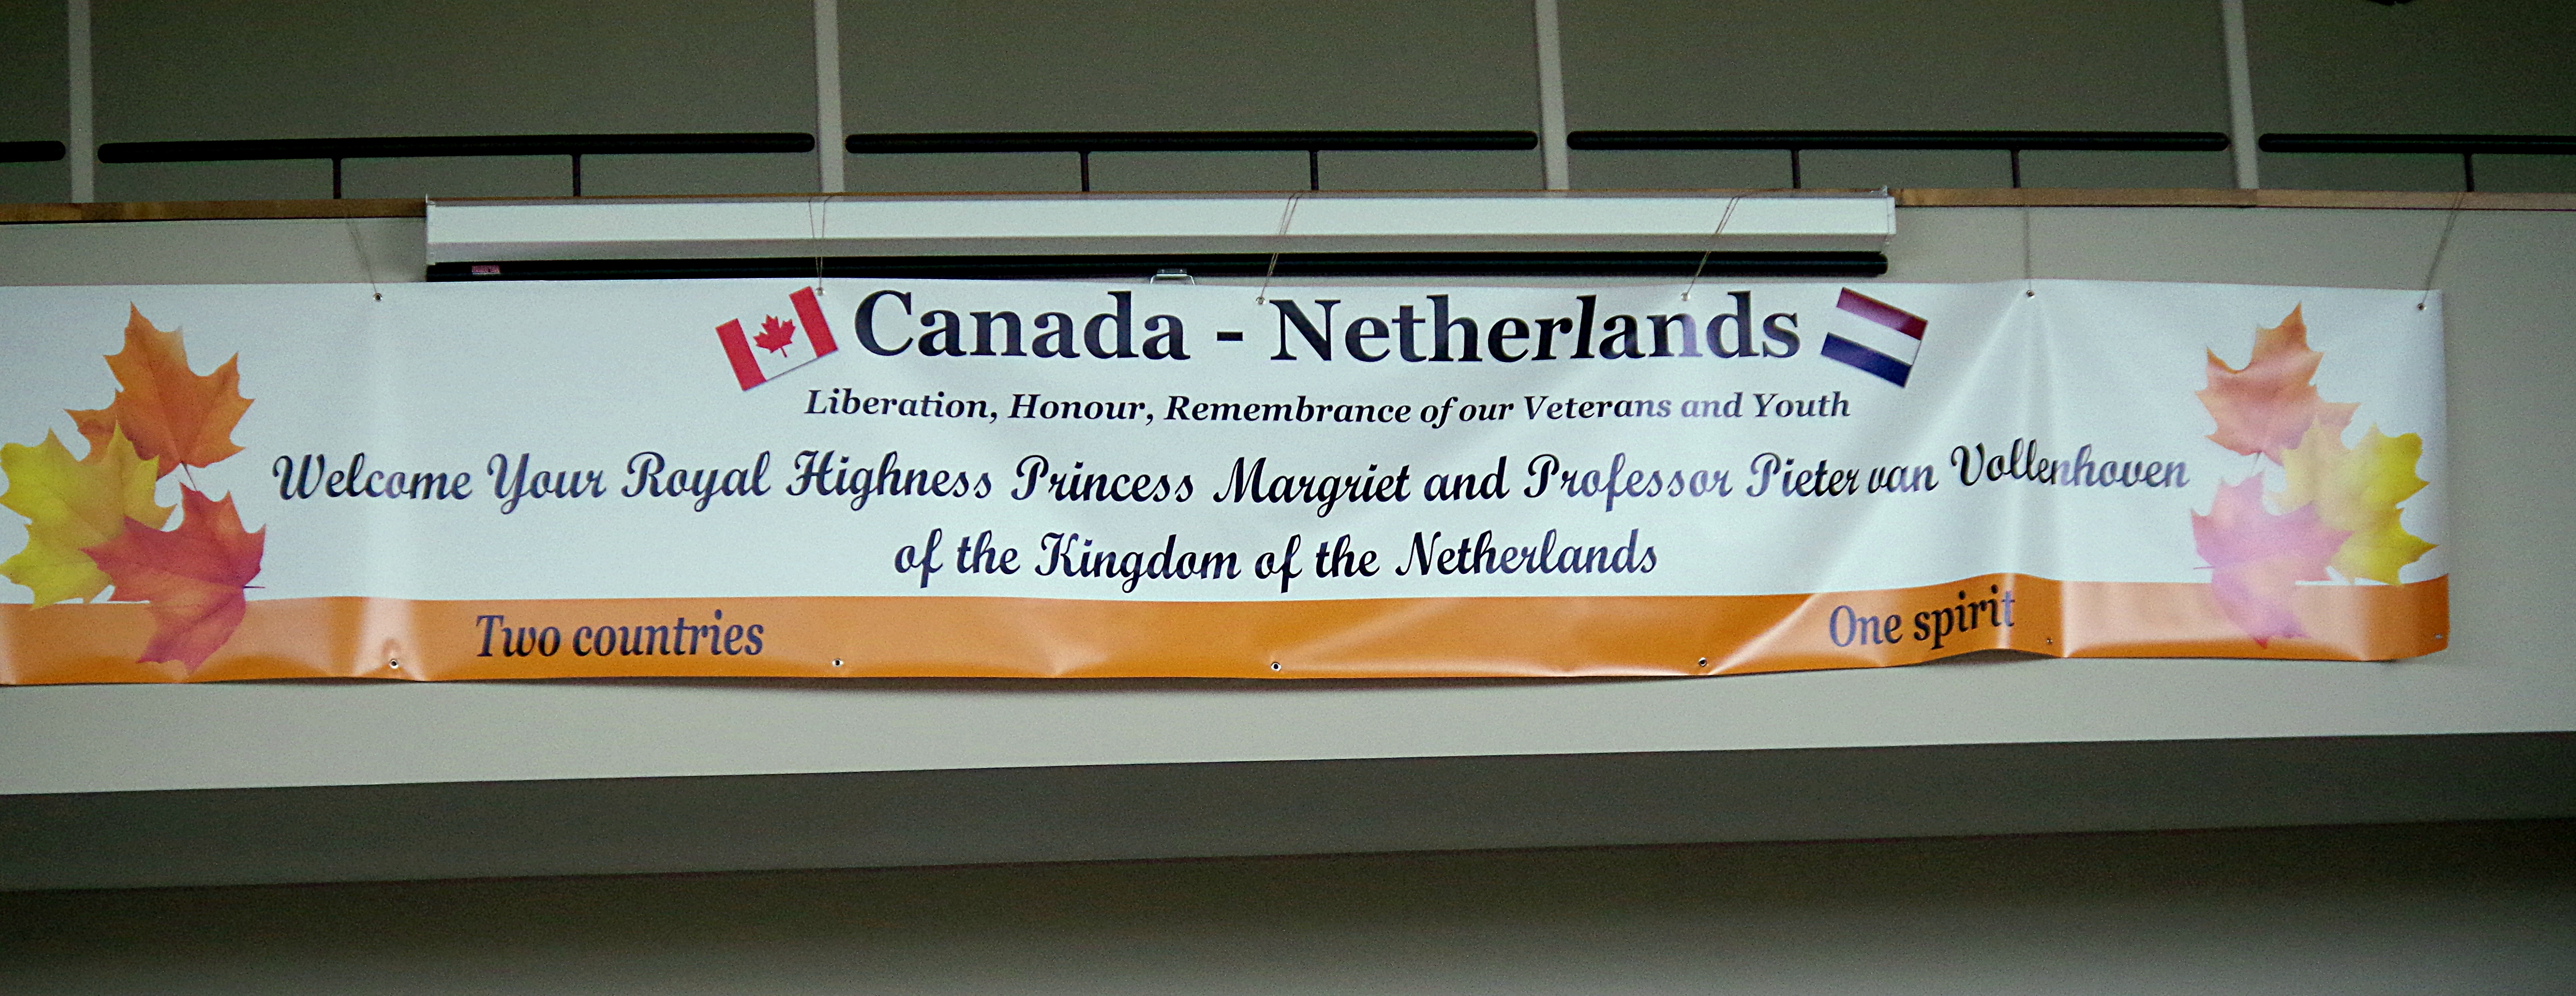 Liberation of the Netherlands Concert by the Royal Regiment of Canada, May 14, 2017